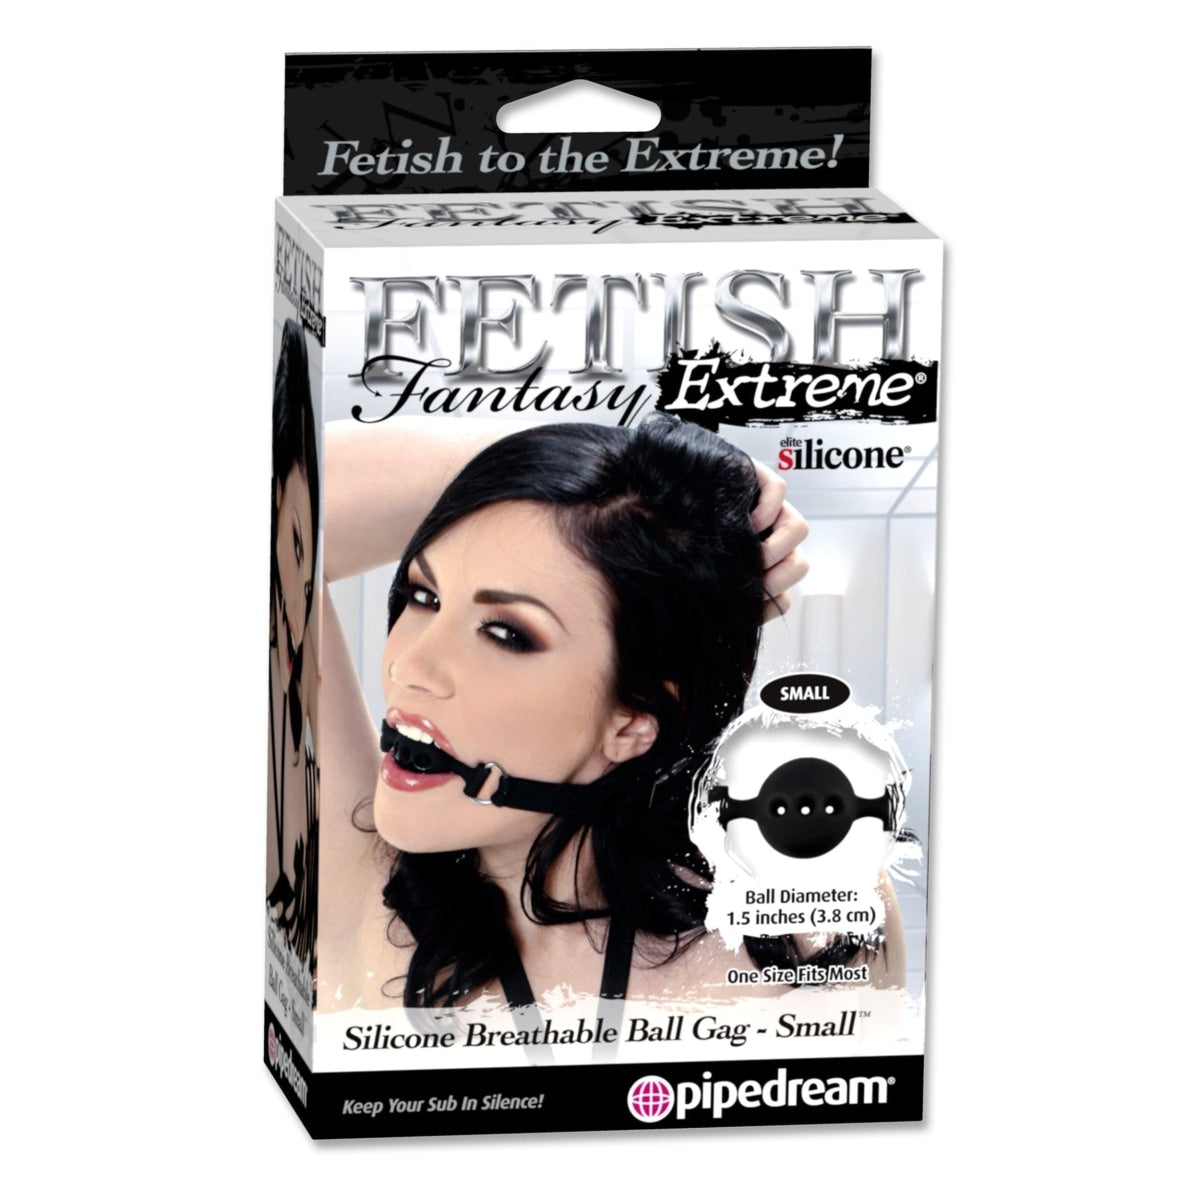 Fetish Fantasy Extreme Breathable Ball Gag Small Intimates Adult Boutique